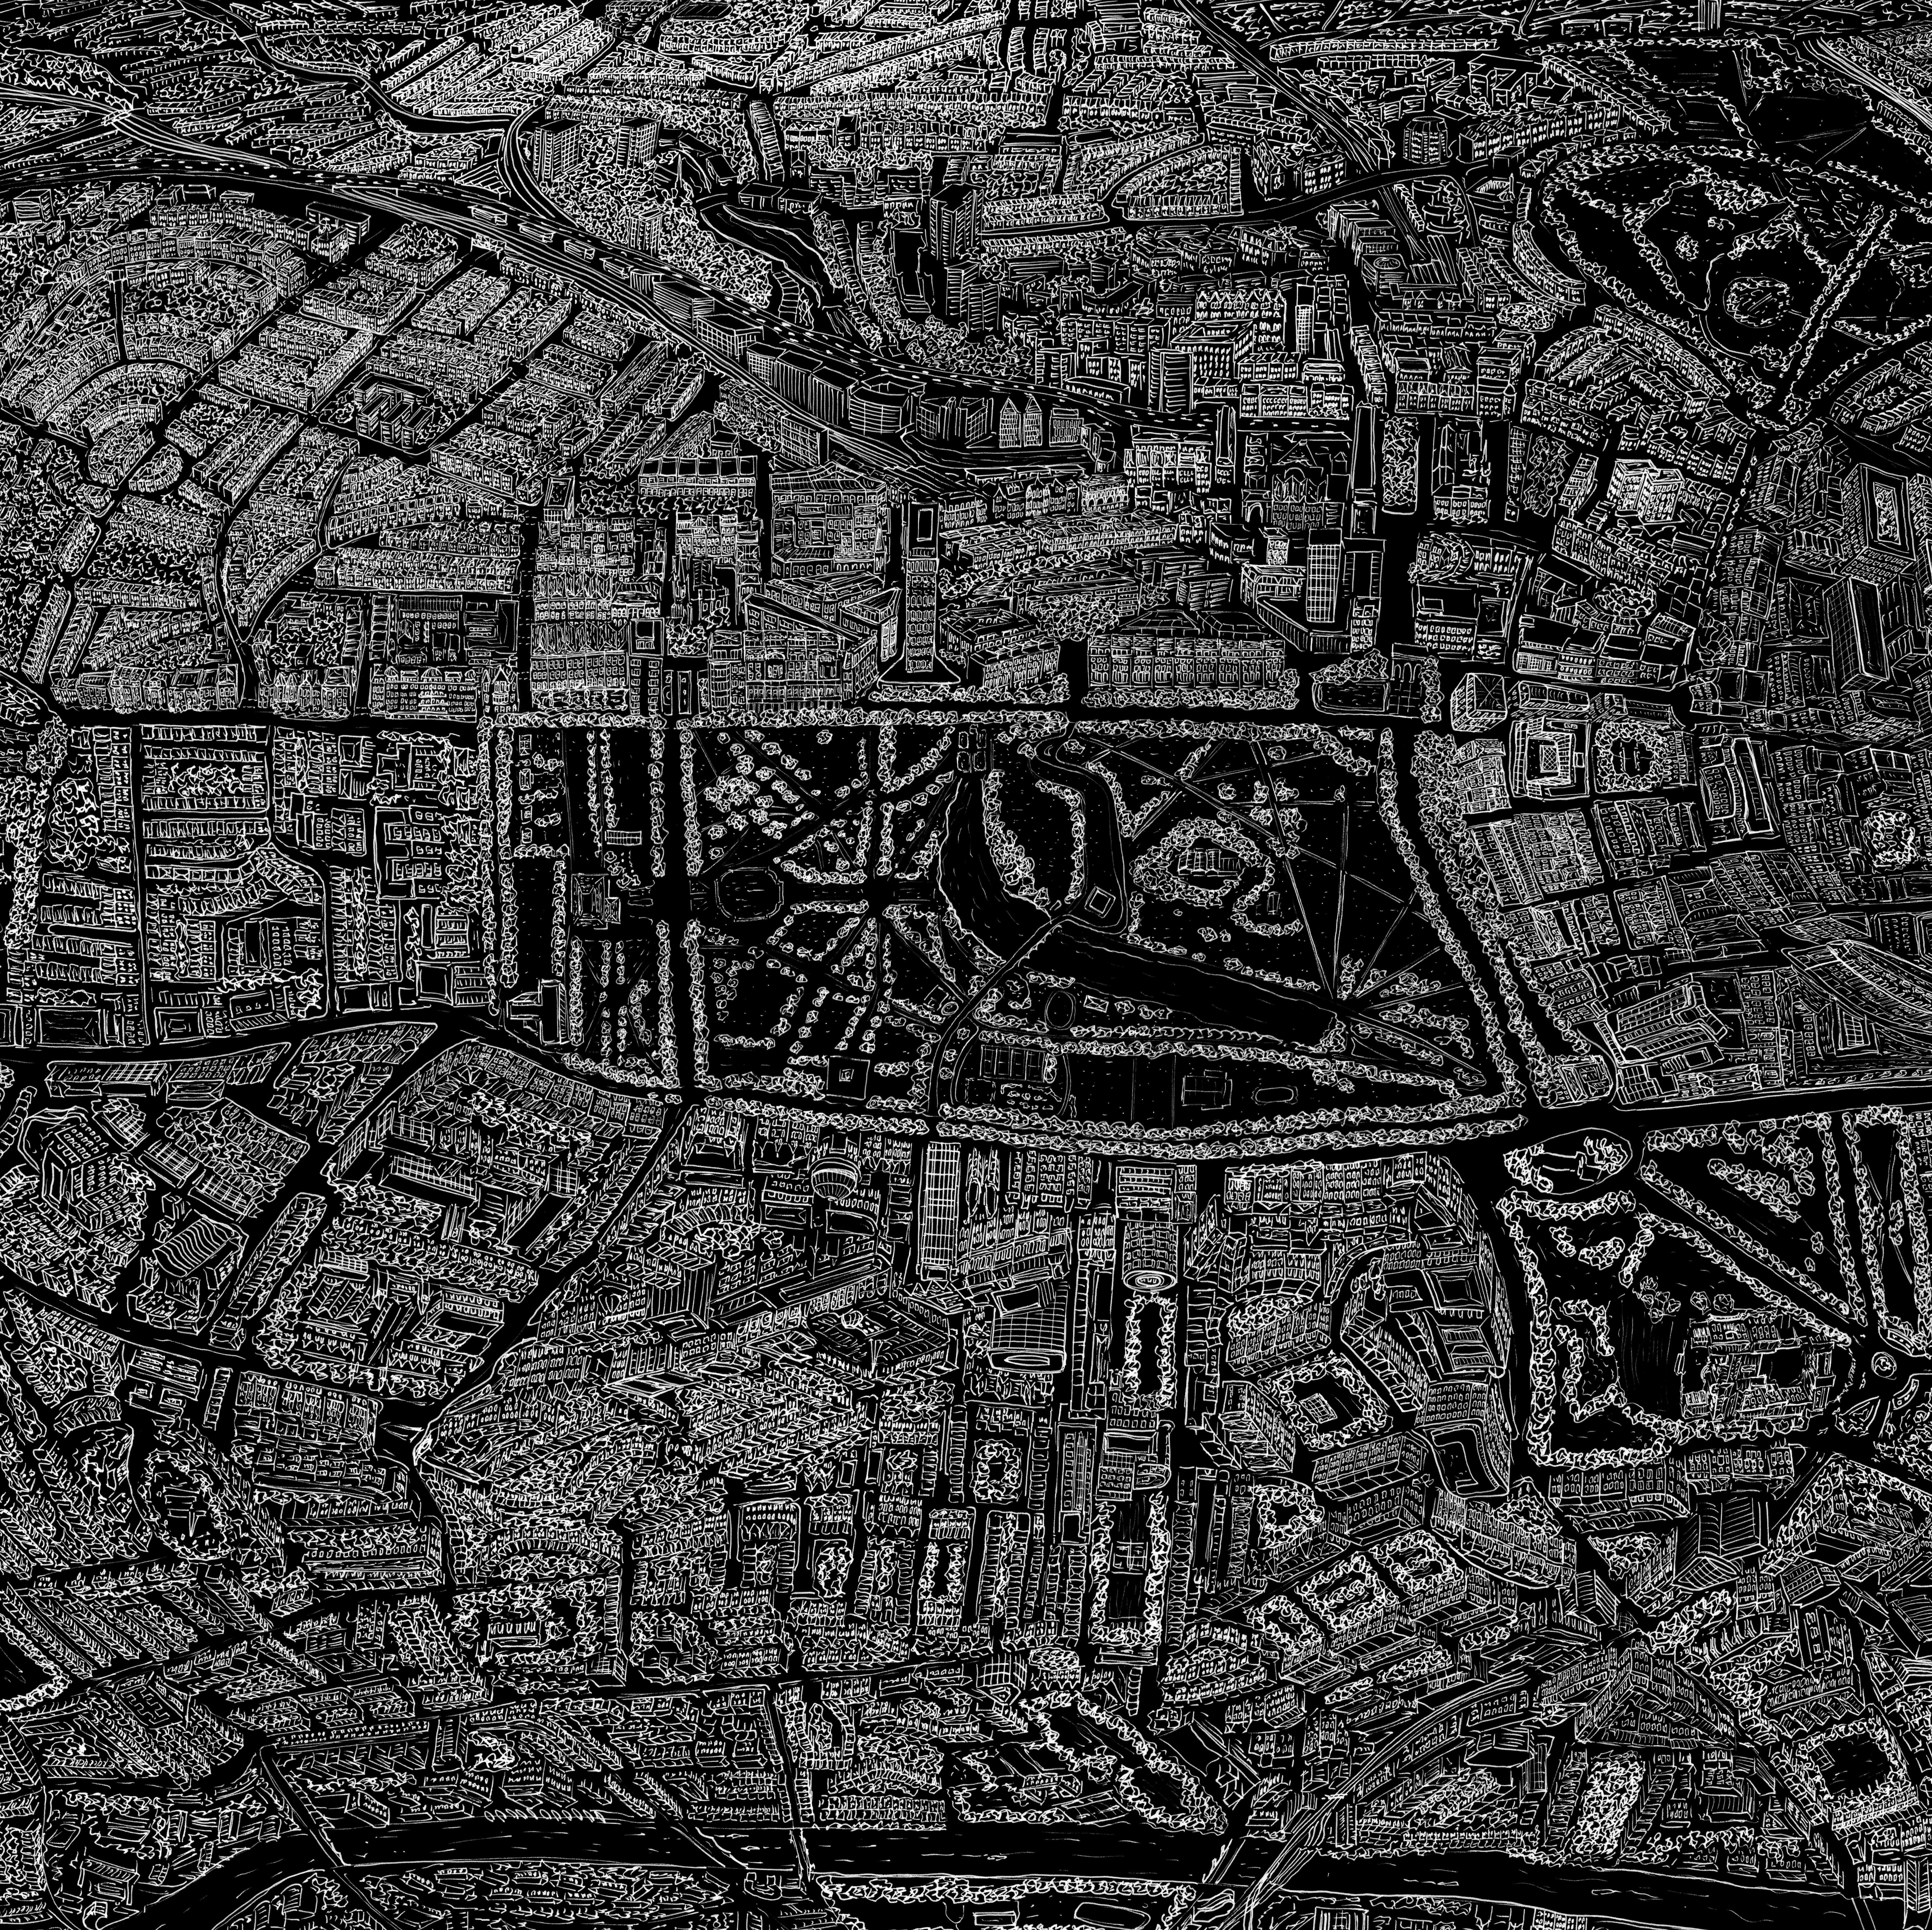 Martin's vision of cities is cartographic. He is undoubtedly a man from another era - who likes the present - his plans of cities are an act of resistance in the era of google maps